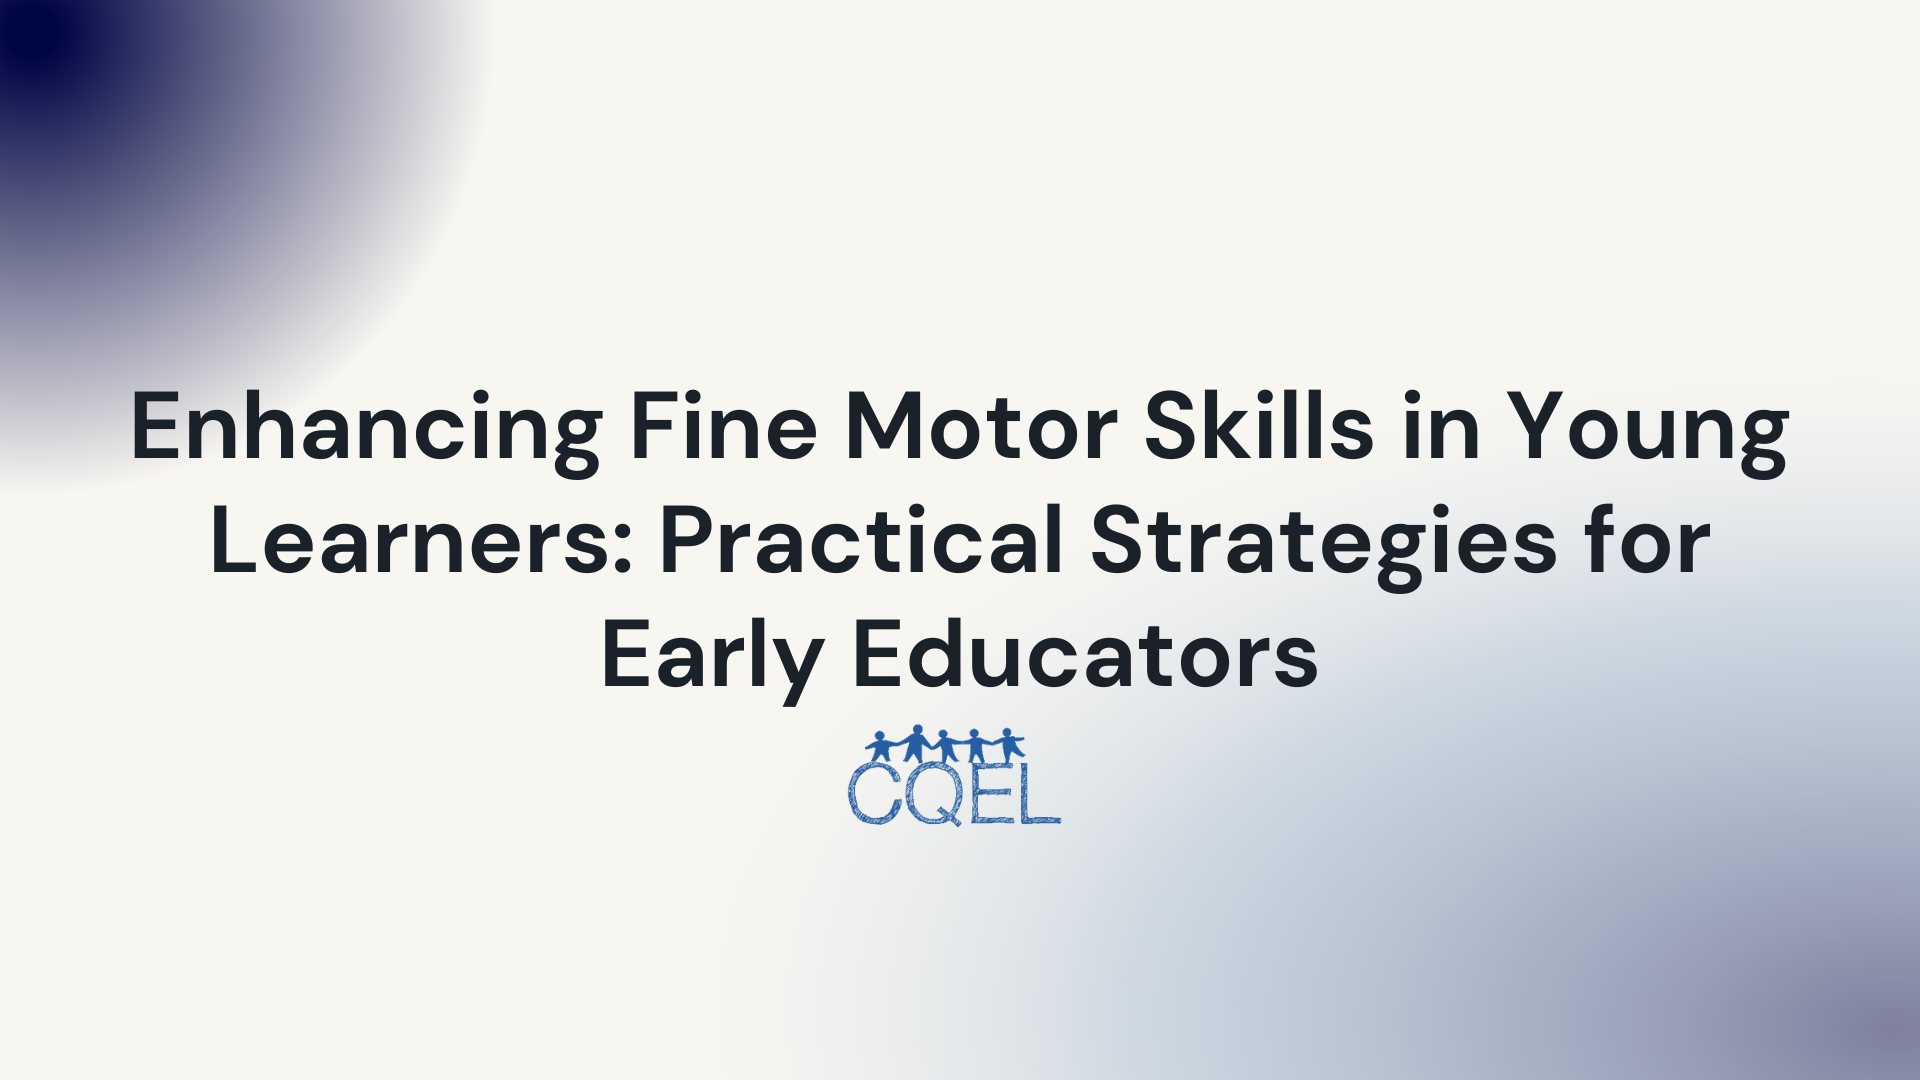 Enhancing Fine Motor Skills in Young Learners: Practical Strategies for Early Educators